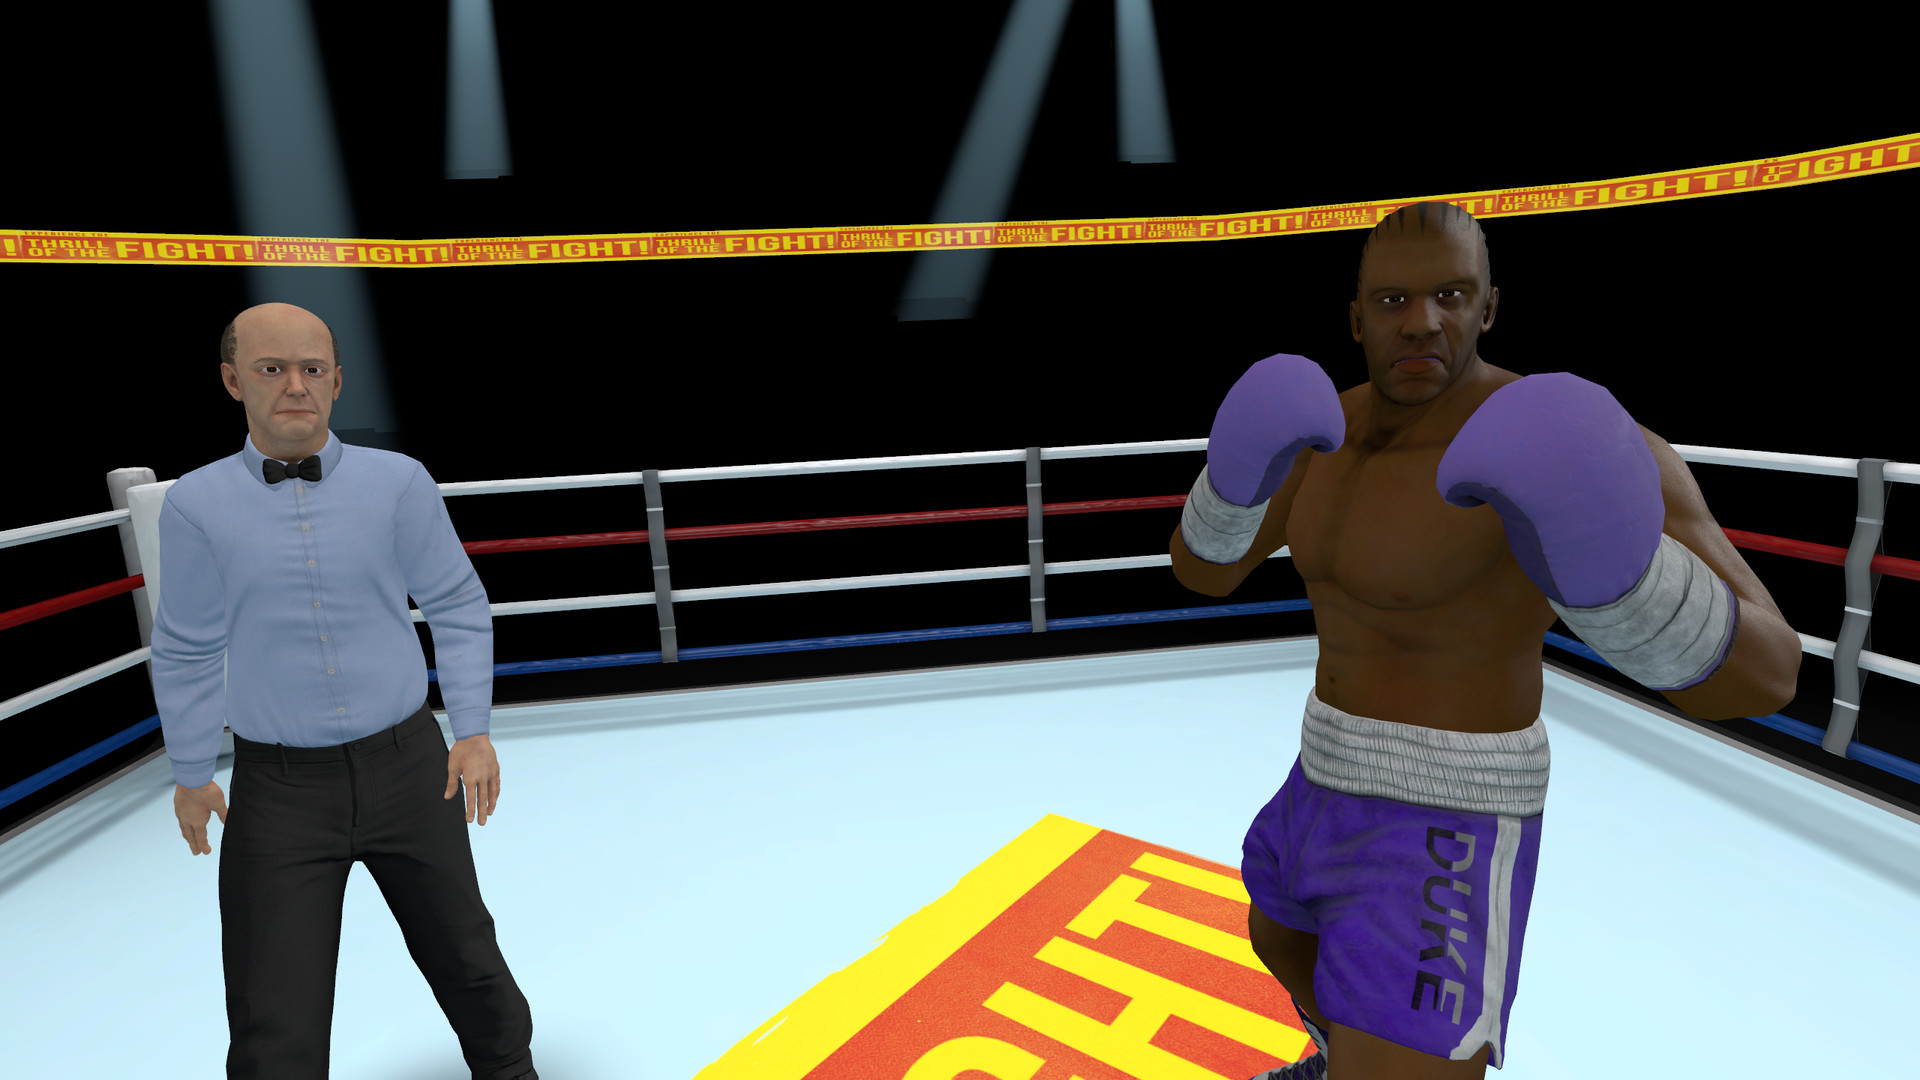 The Thrill of the Fight - VR Boxing sur Steam